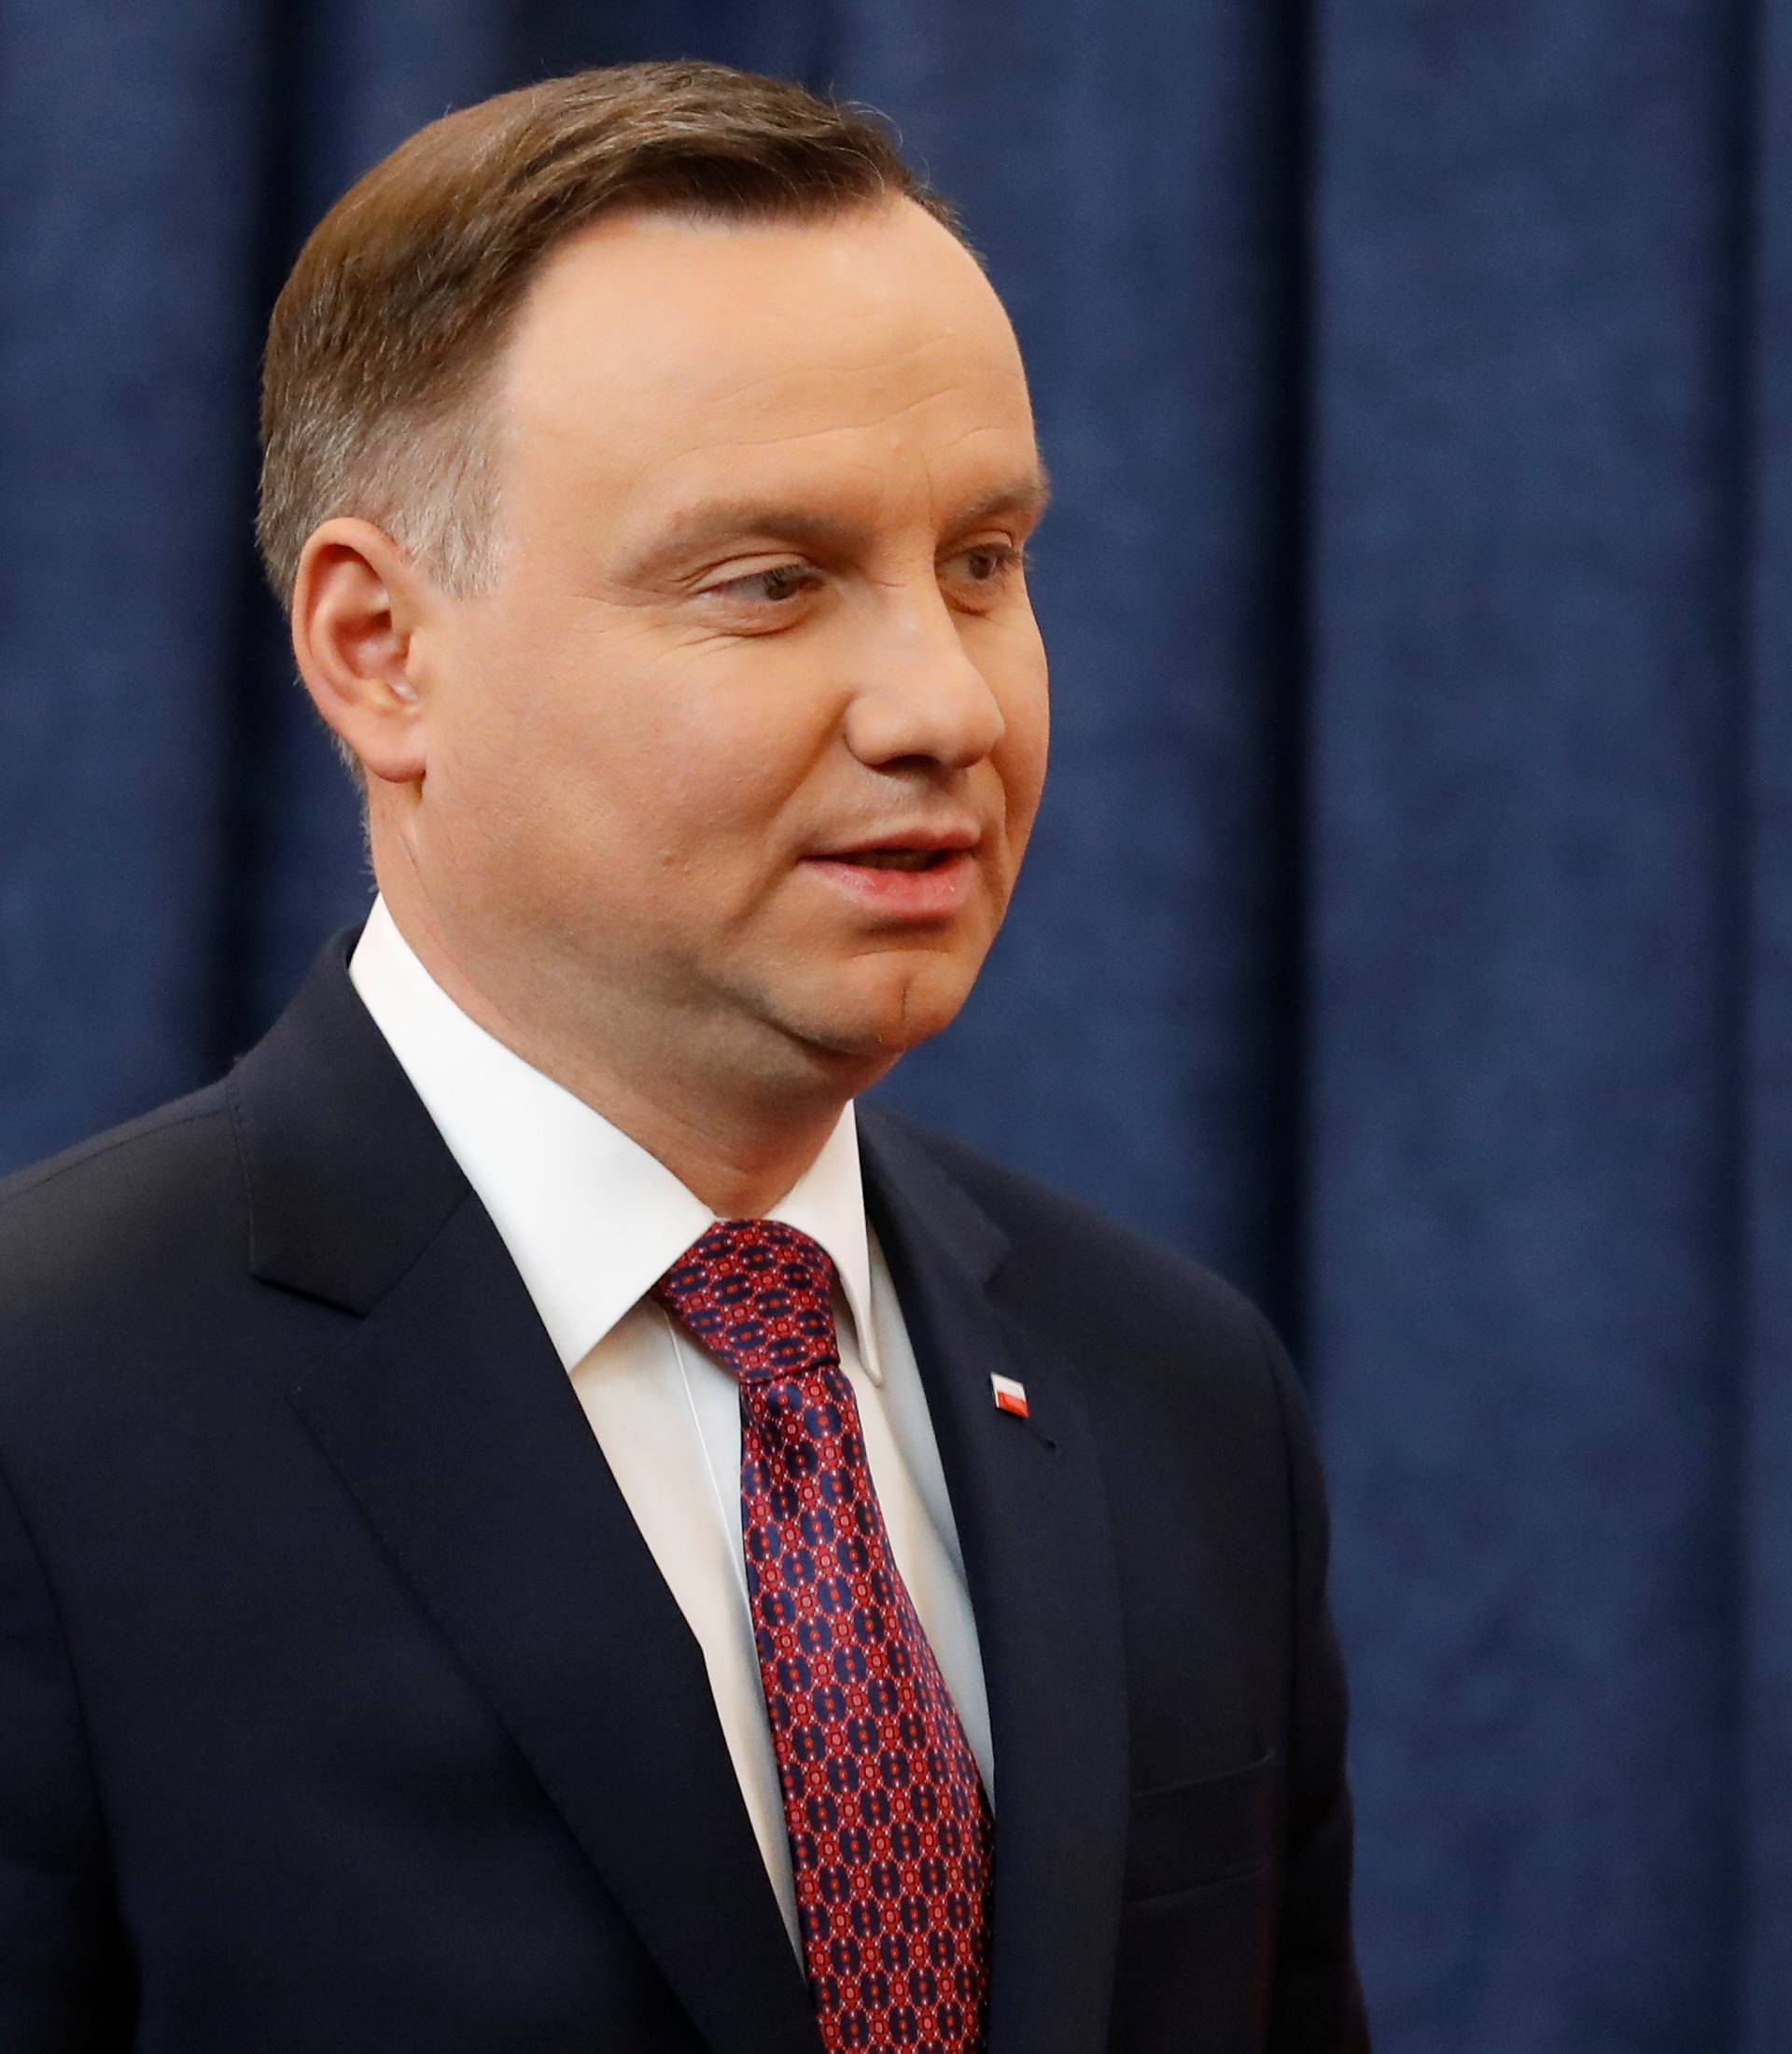 Poland's President Andrzej Duda arrives for a news conference at the Presidential Palace in Warsaw